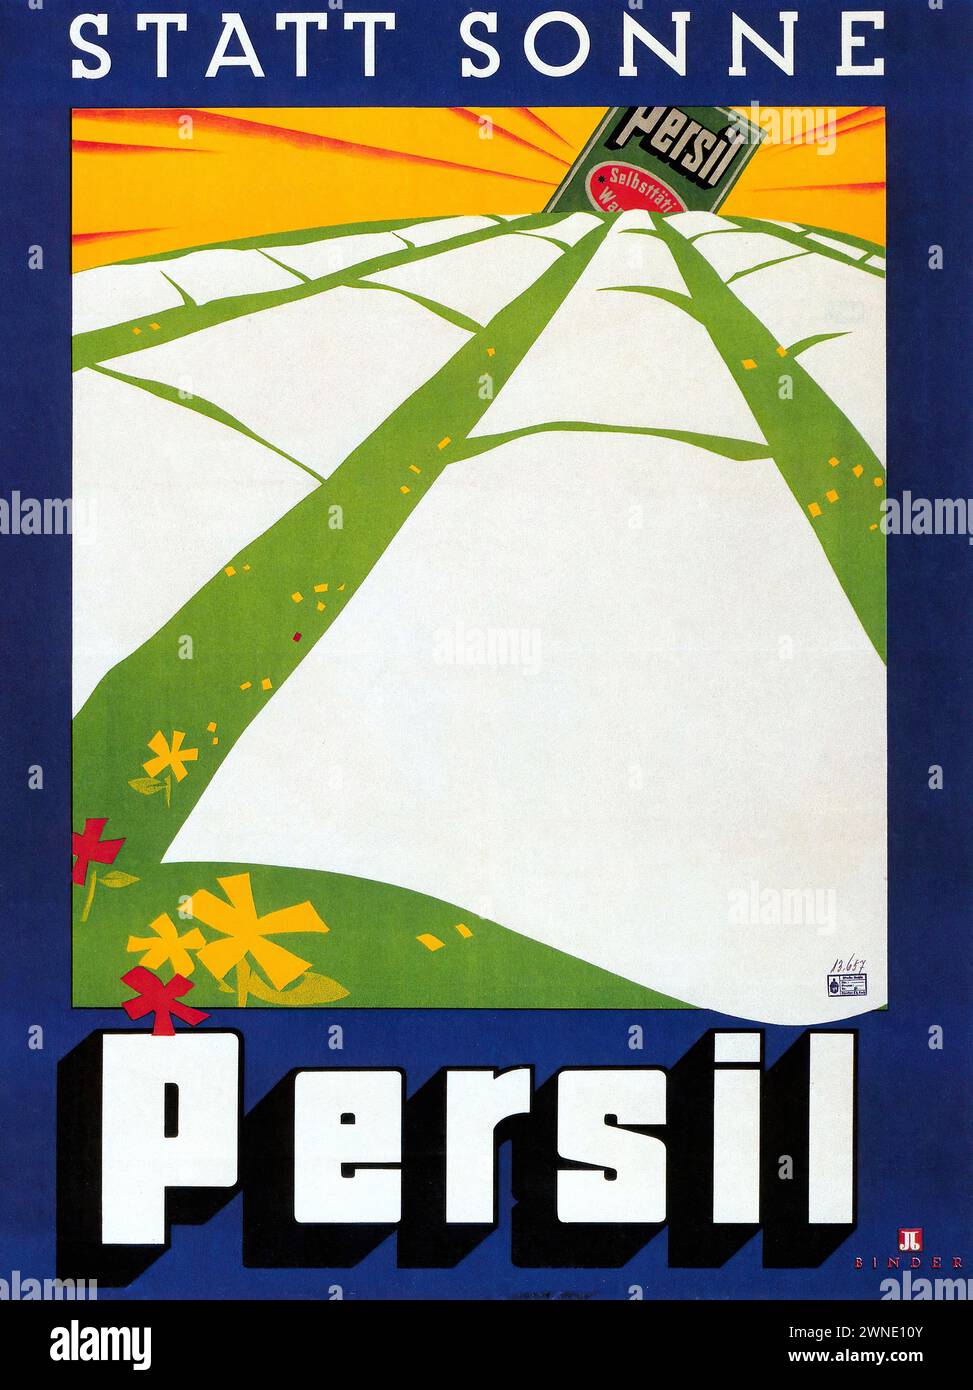 'STATT SONNE PERSIL' ['INSTEAD OF SUN, PERSIL'] Vintage Advertising. This image portrays roads converging towards a shining Persil package with a backdrop of a sunlit sky. The use of perspective and simplified forms aligns with the Art Deco graphic style. Stock Photo